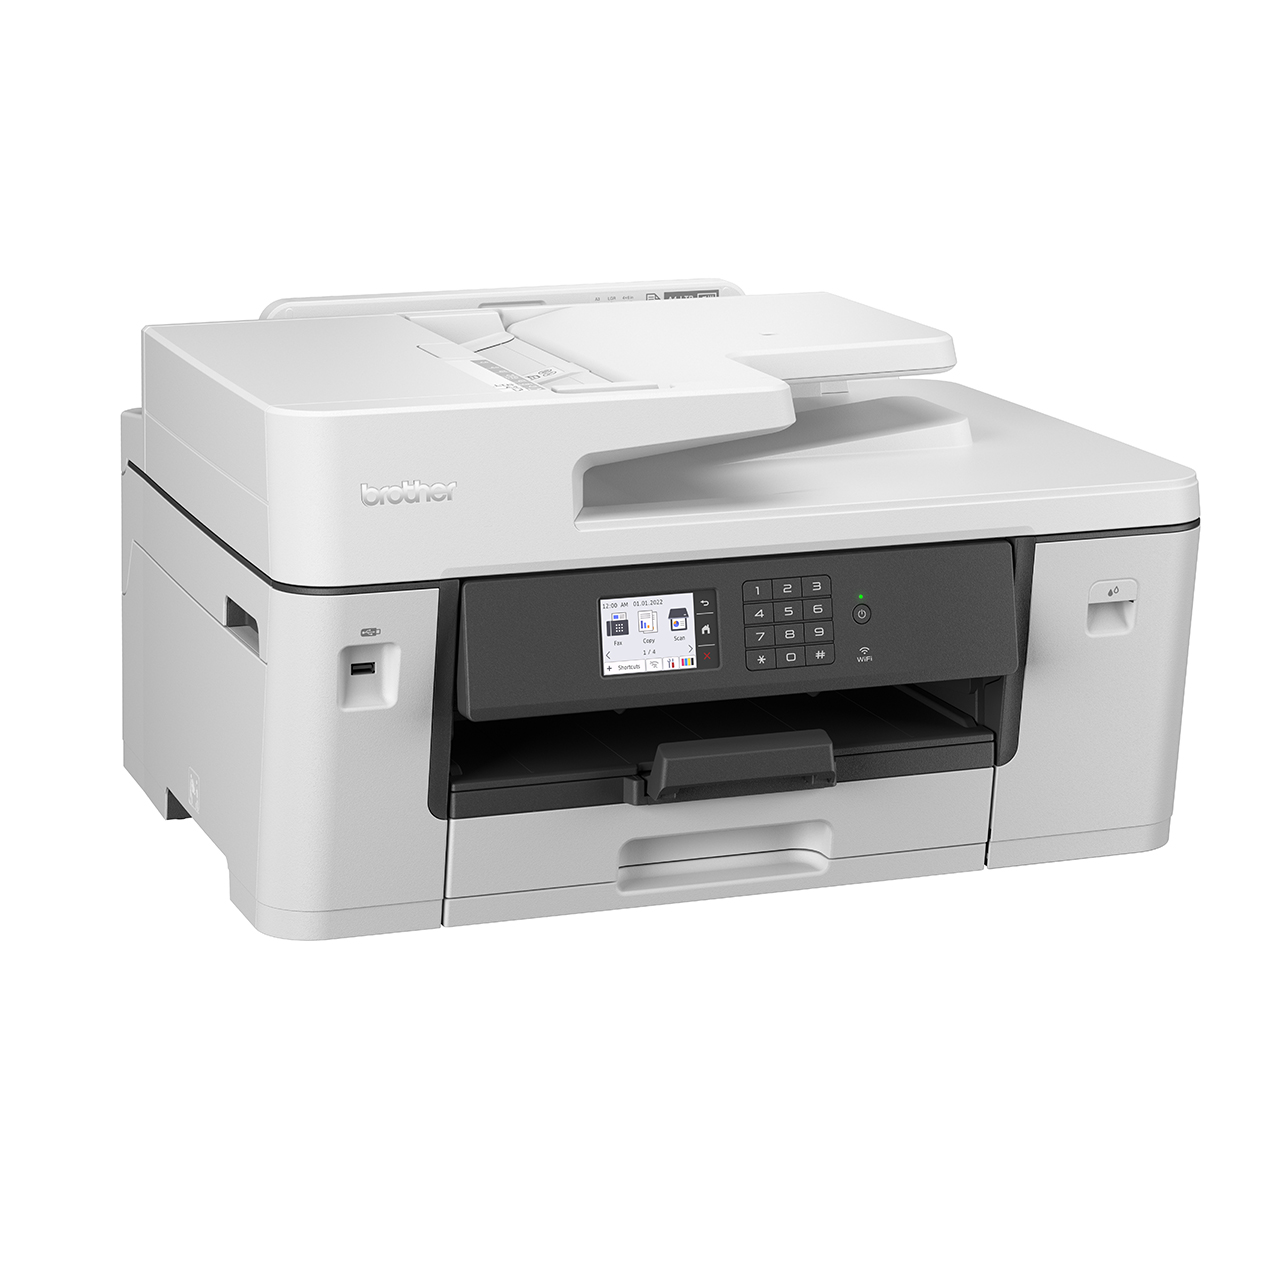 Brother MFC-J3540DW Professional A3 inkjet Wireless All-in-One Printer | Help Tech Co. Ltd